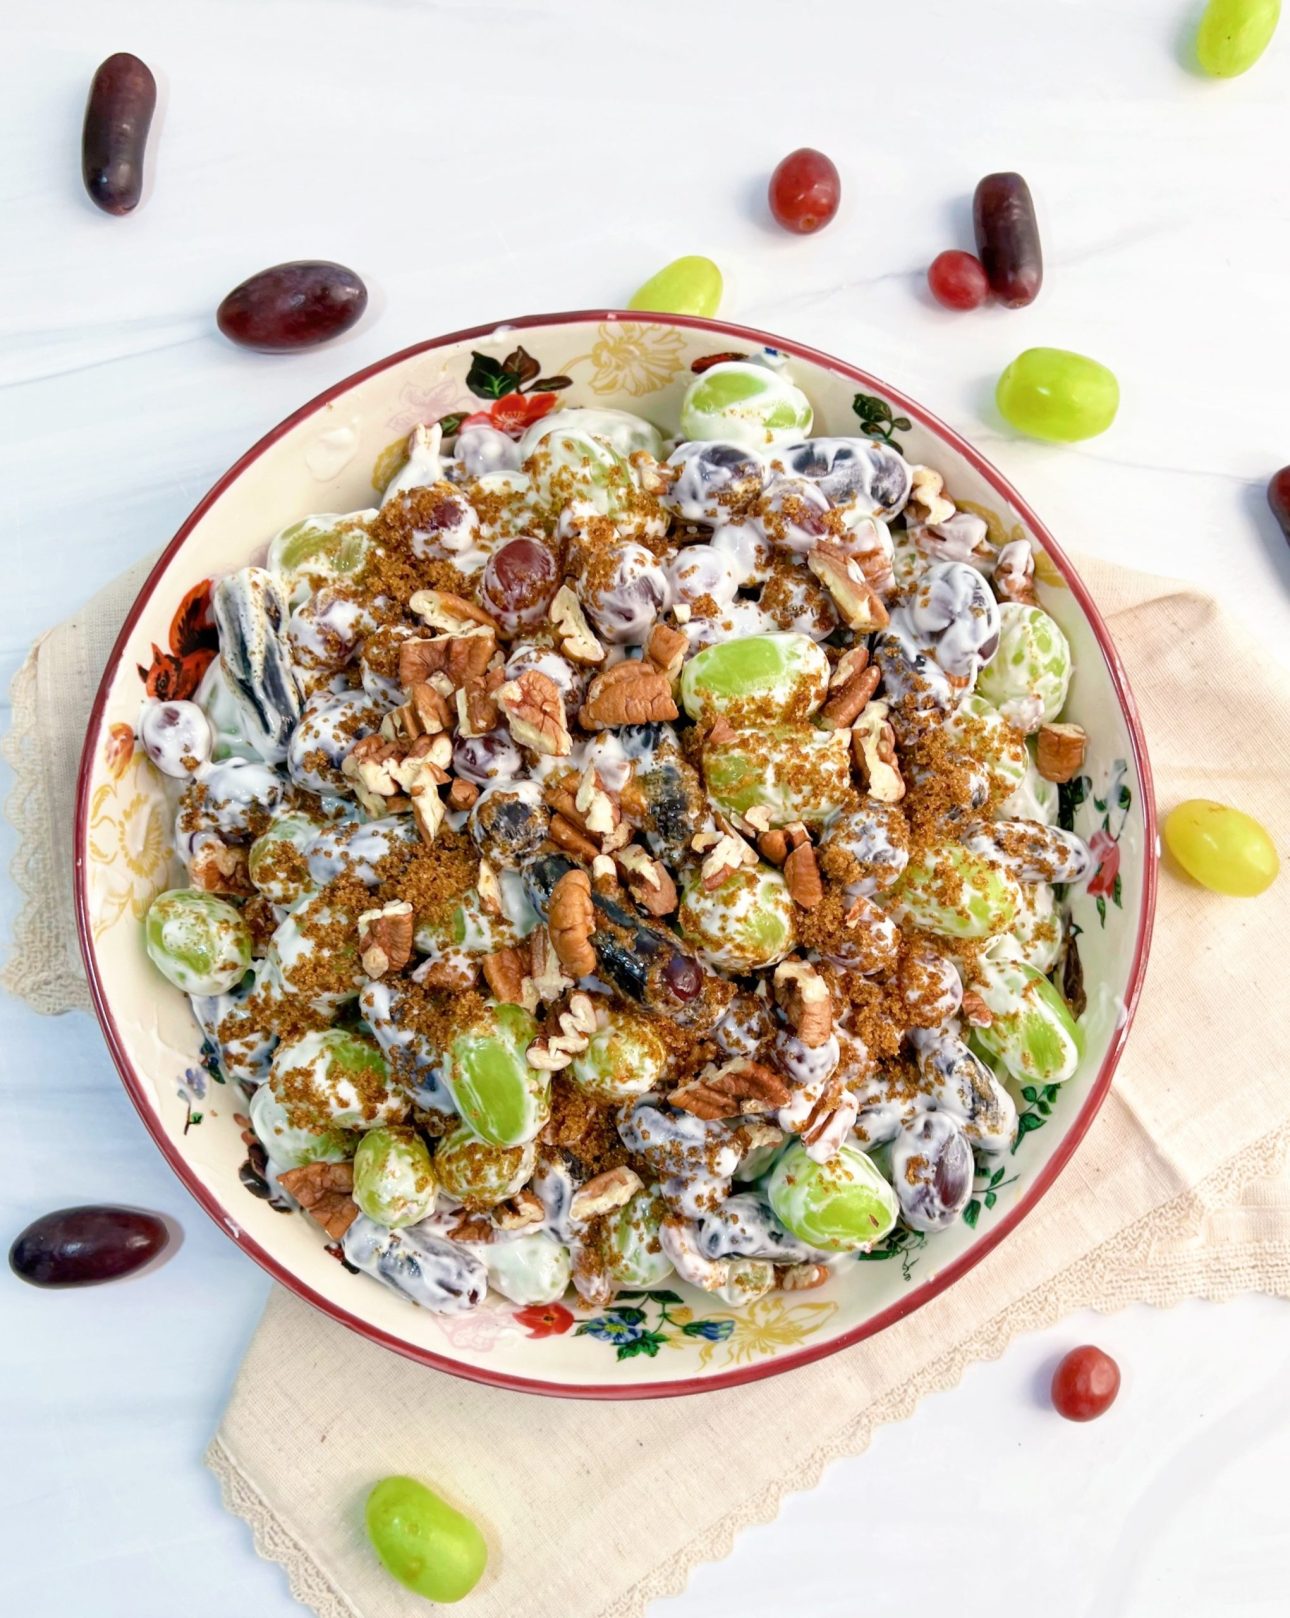 Best Southern Grape Salad with Pecans